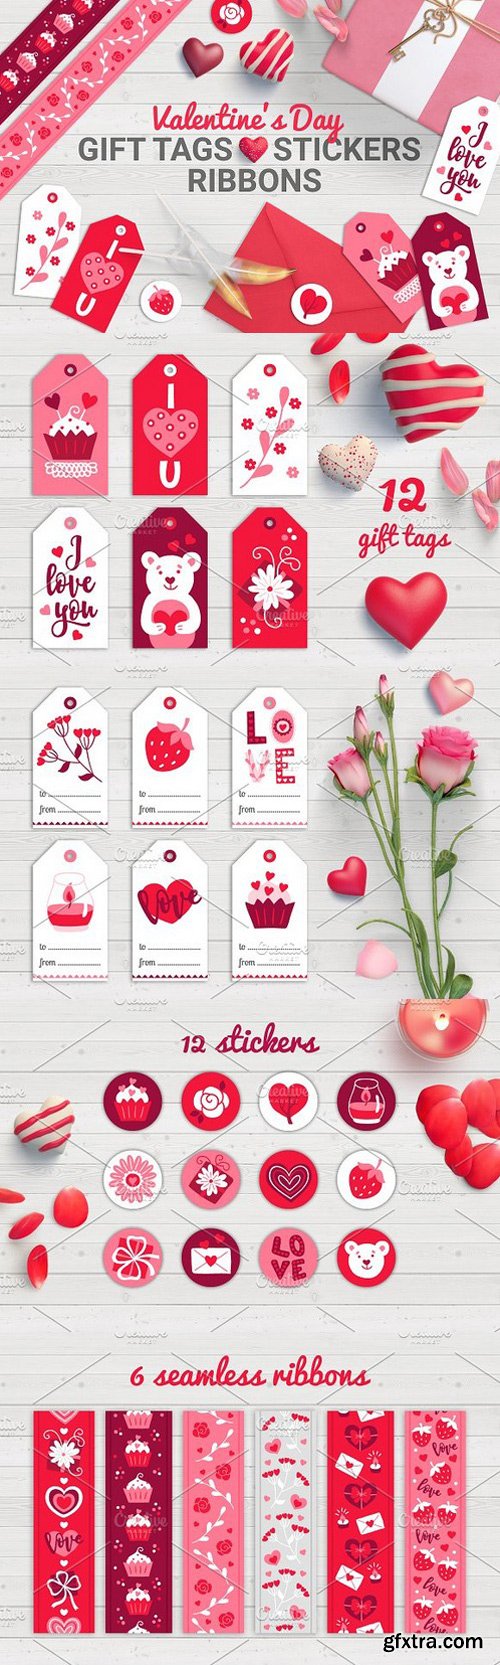 Valentine Gift Tags Stickers Tapes